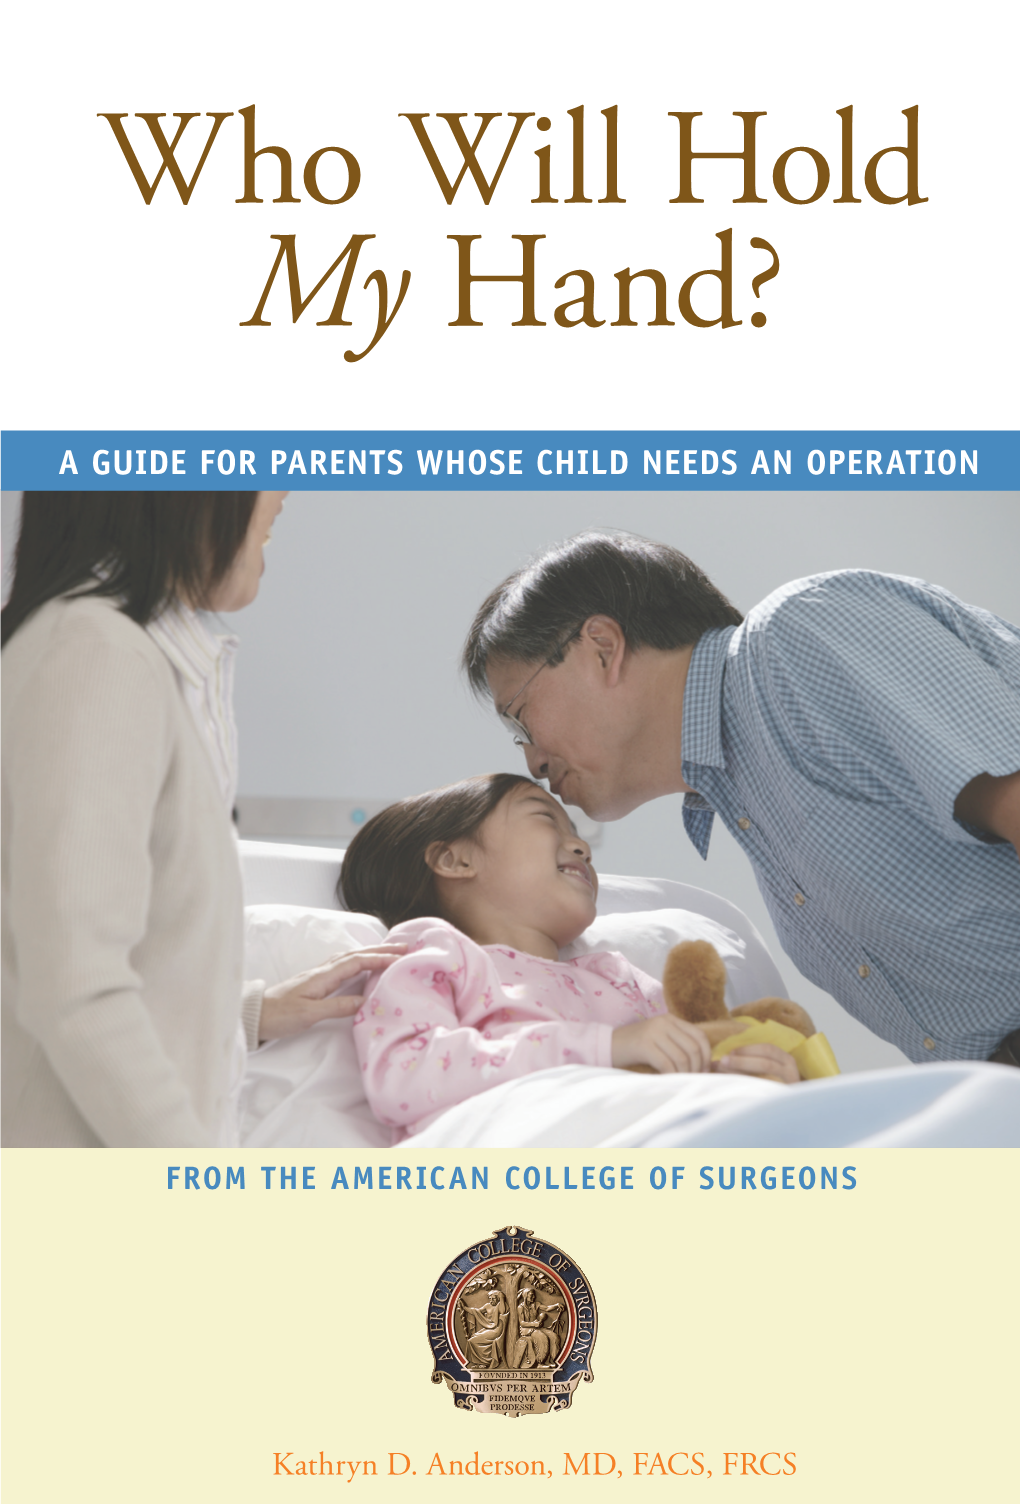 A Guide for Parents Whose Child Needs an Operation